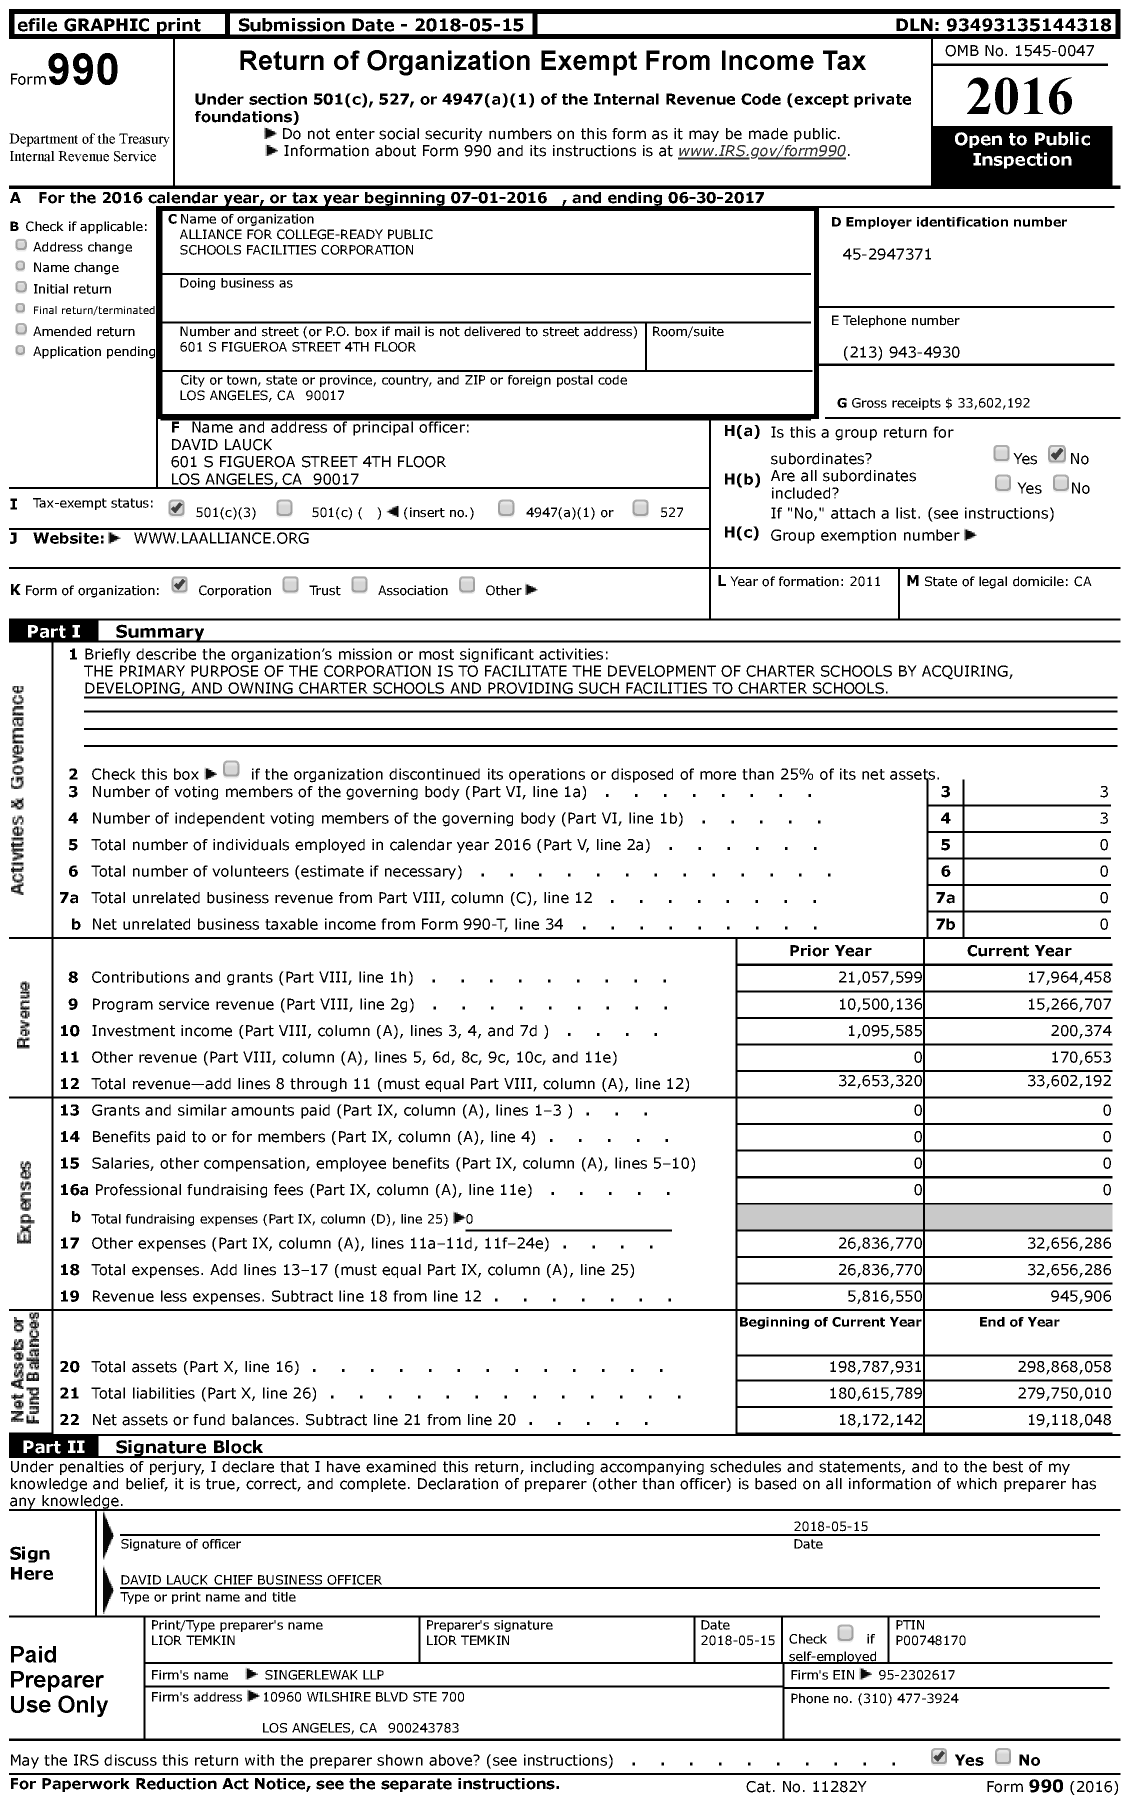 Image of first page of 2016 Form 990 for Alliance for College-Ready Public Schools Facilities Corporation